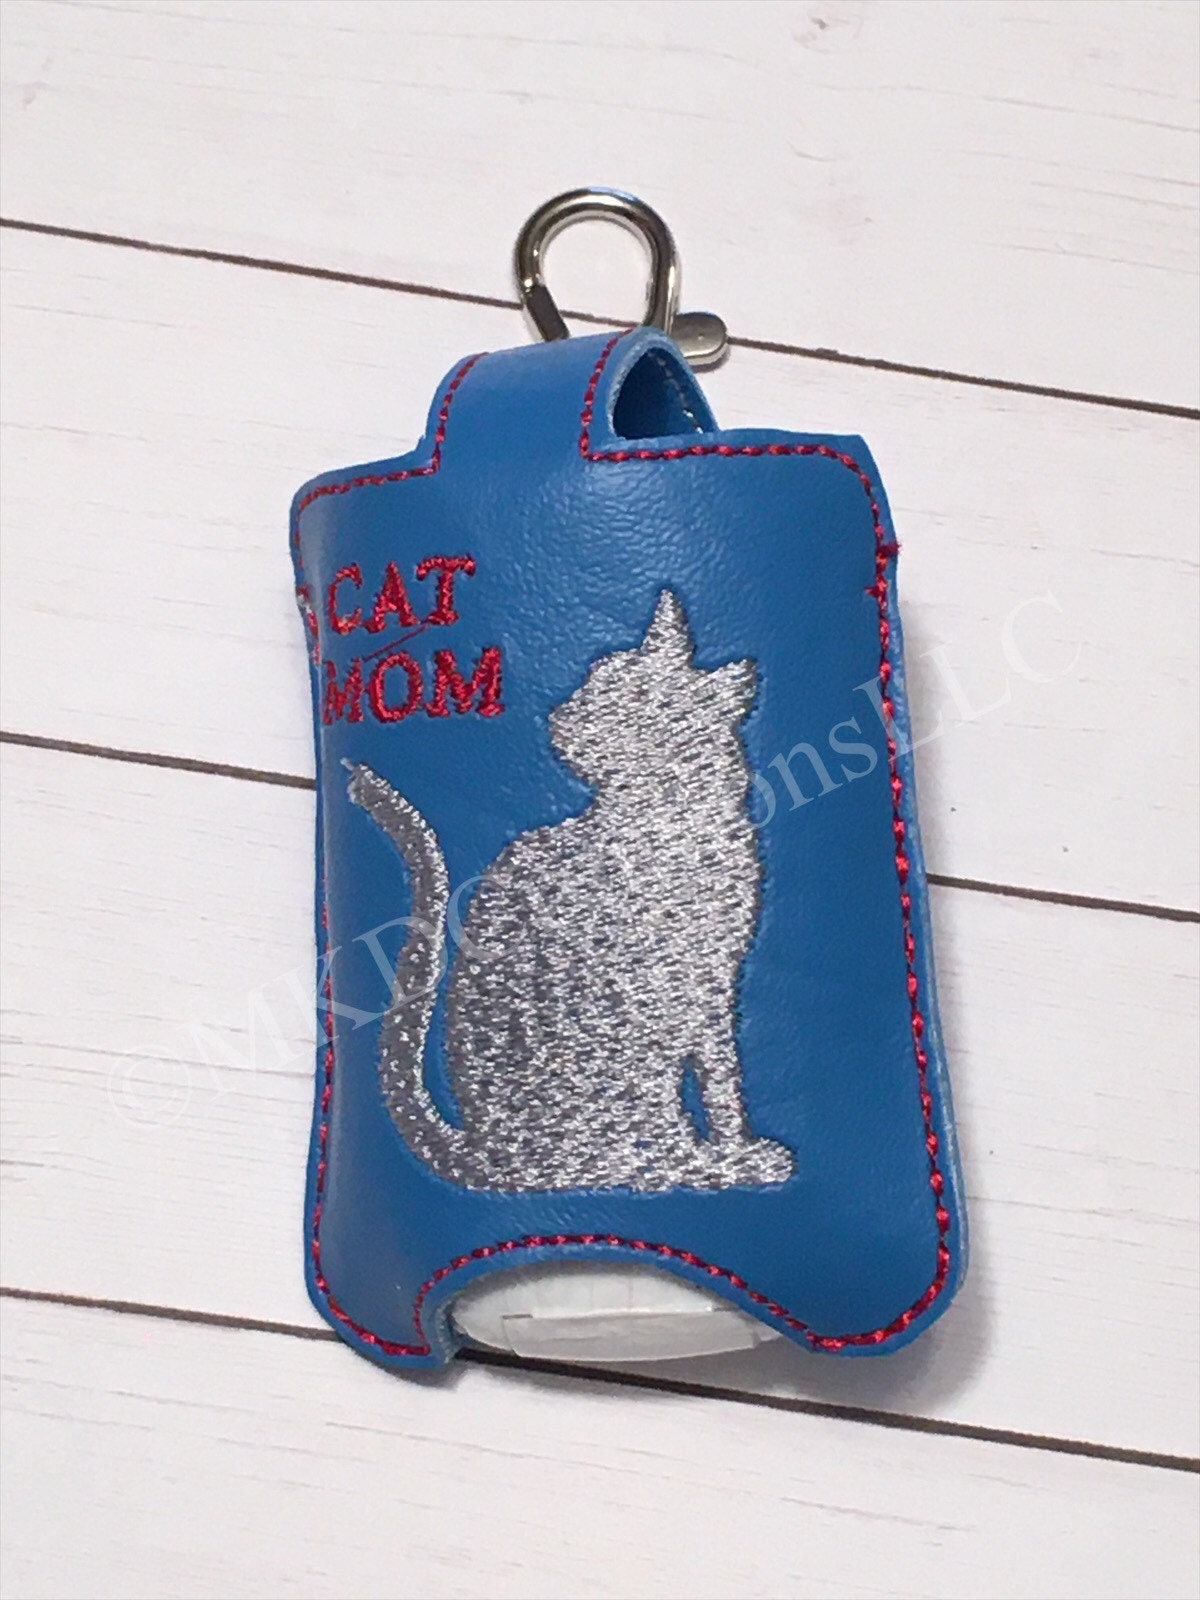 Cat Key chain hand sanitizer holder w/o 1 oz. hand sanitizer | key chain hand sanitizer holder 1oz. hand sanitizer not included